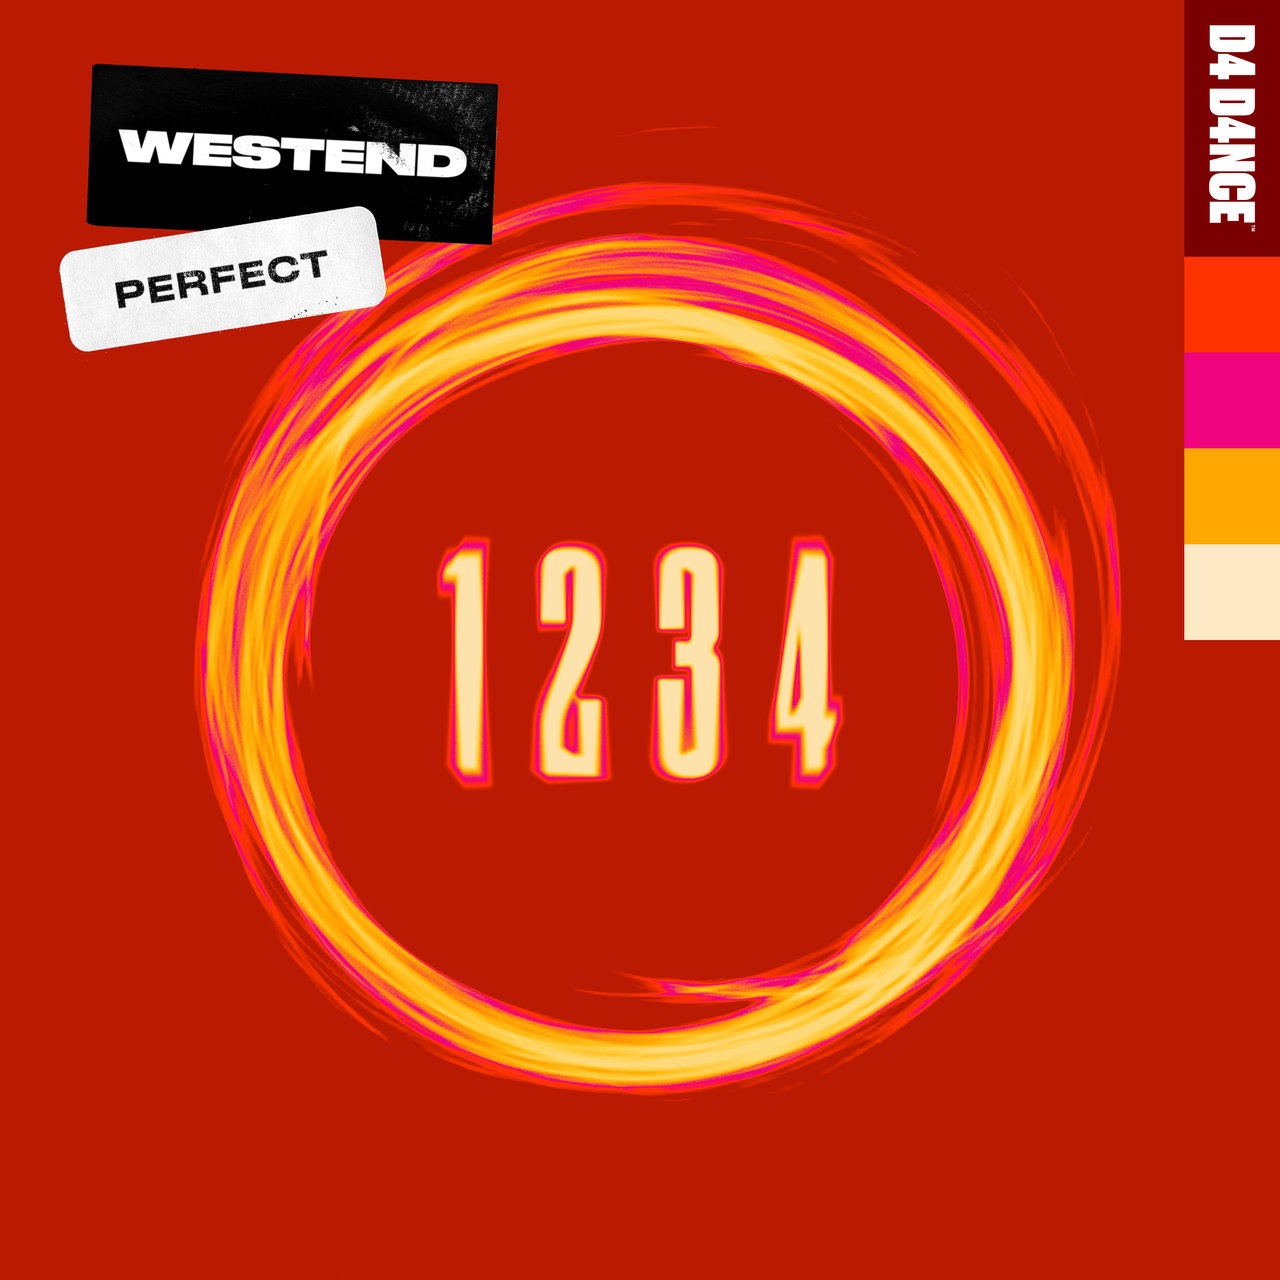 Westend Perfect cover artwork